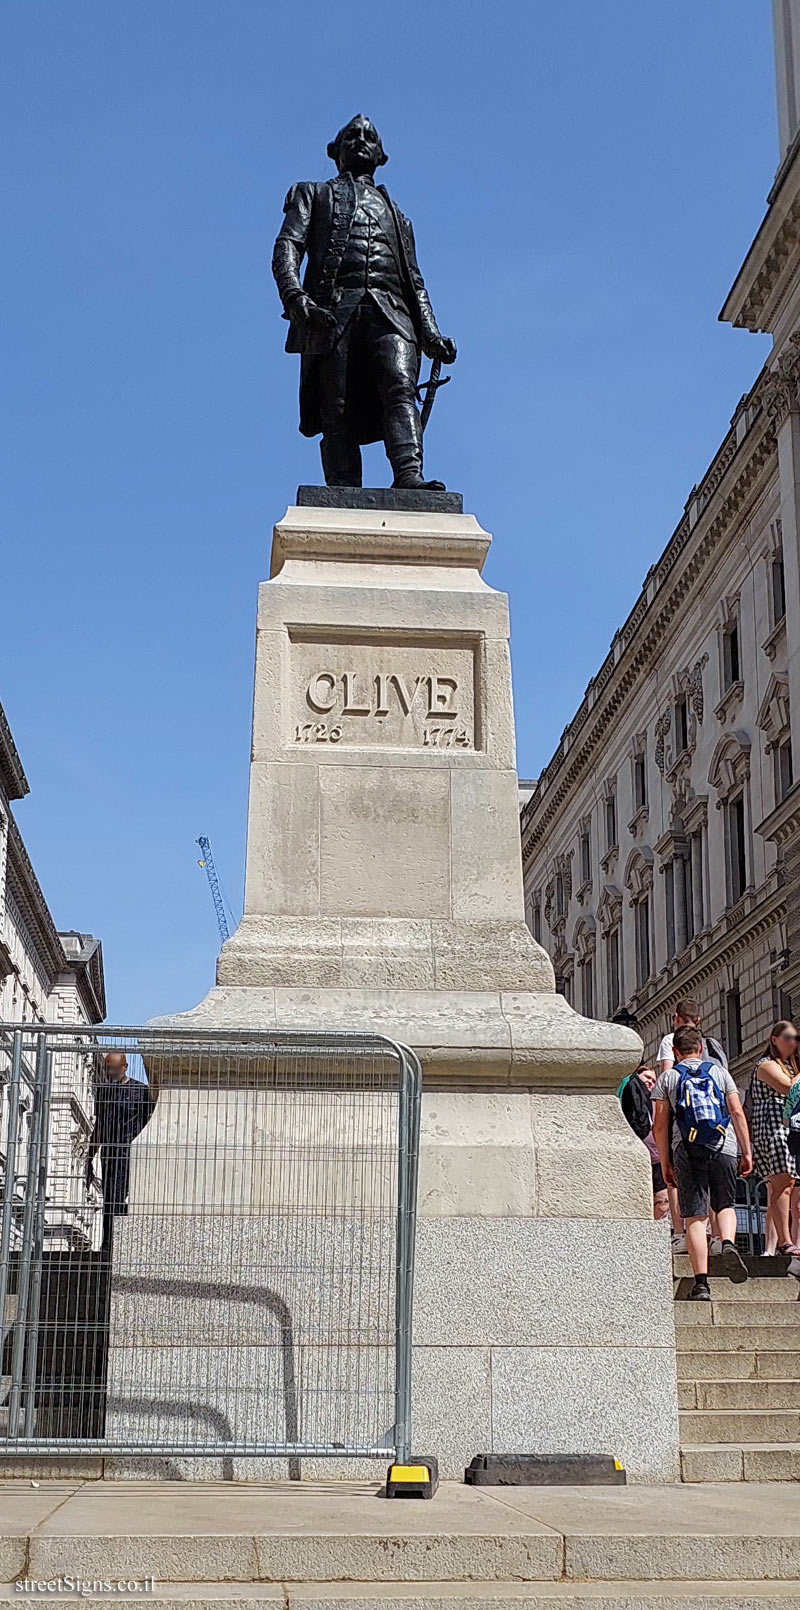 London - Statue commemorating military man Robert Clive - 1 Horse Guards Rd, London SW1A 2HQ, UK